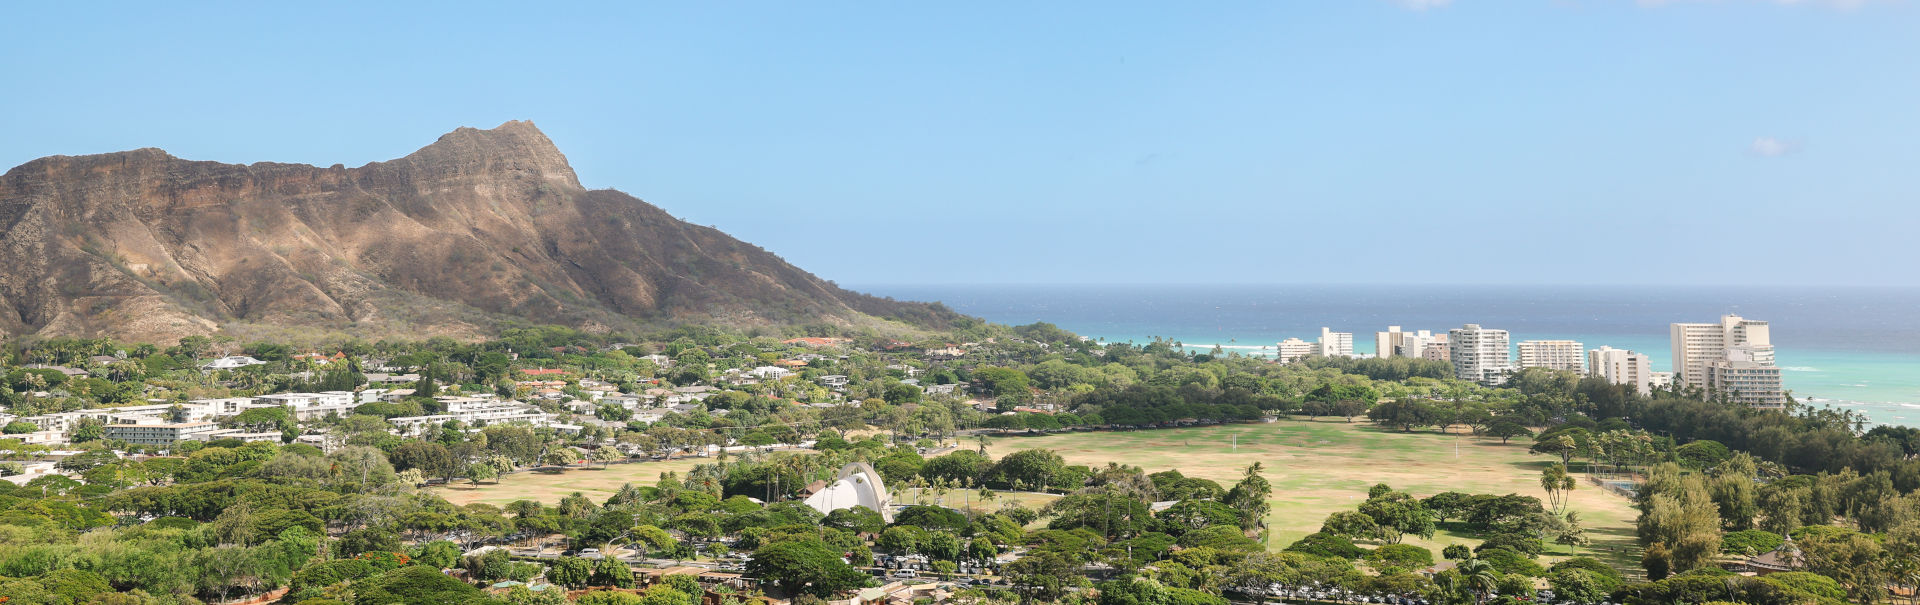 View of Diamond Head Crater and Kapiolani Park with the Pacific Ocean in the horizon